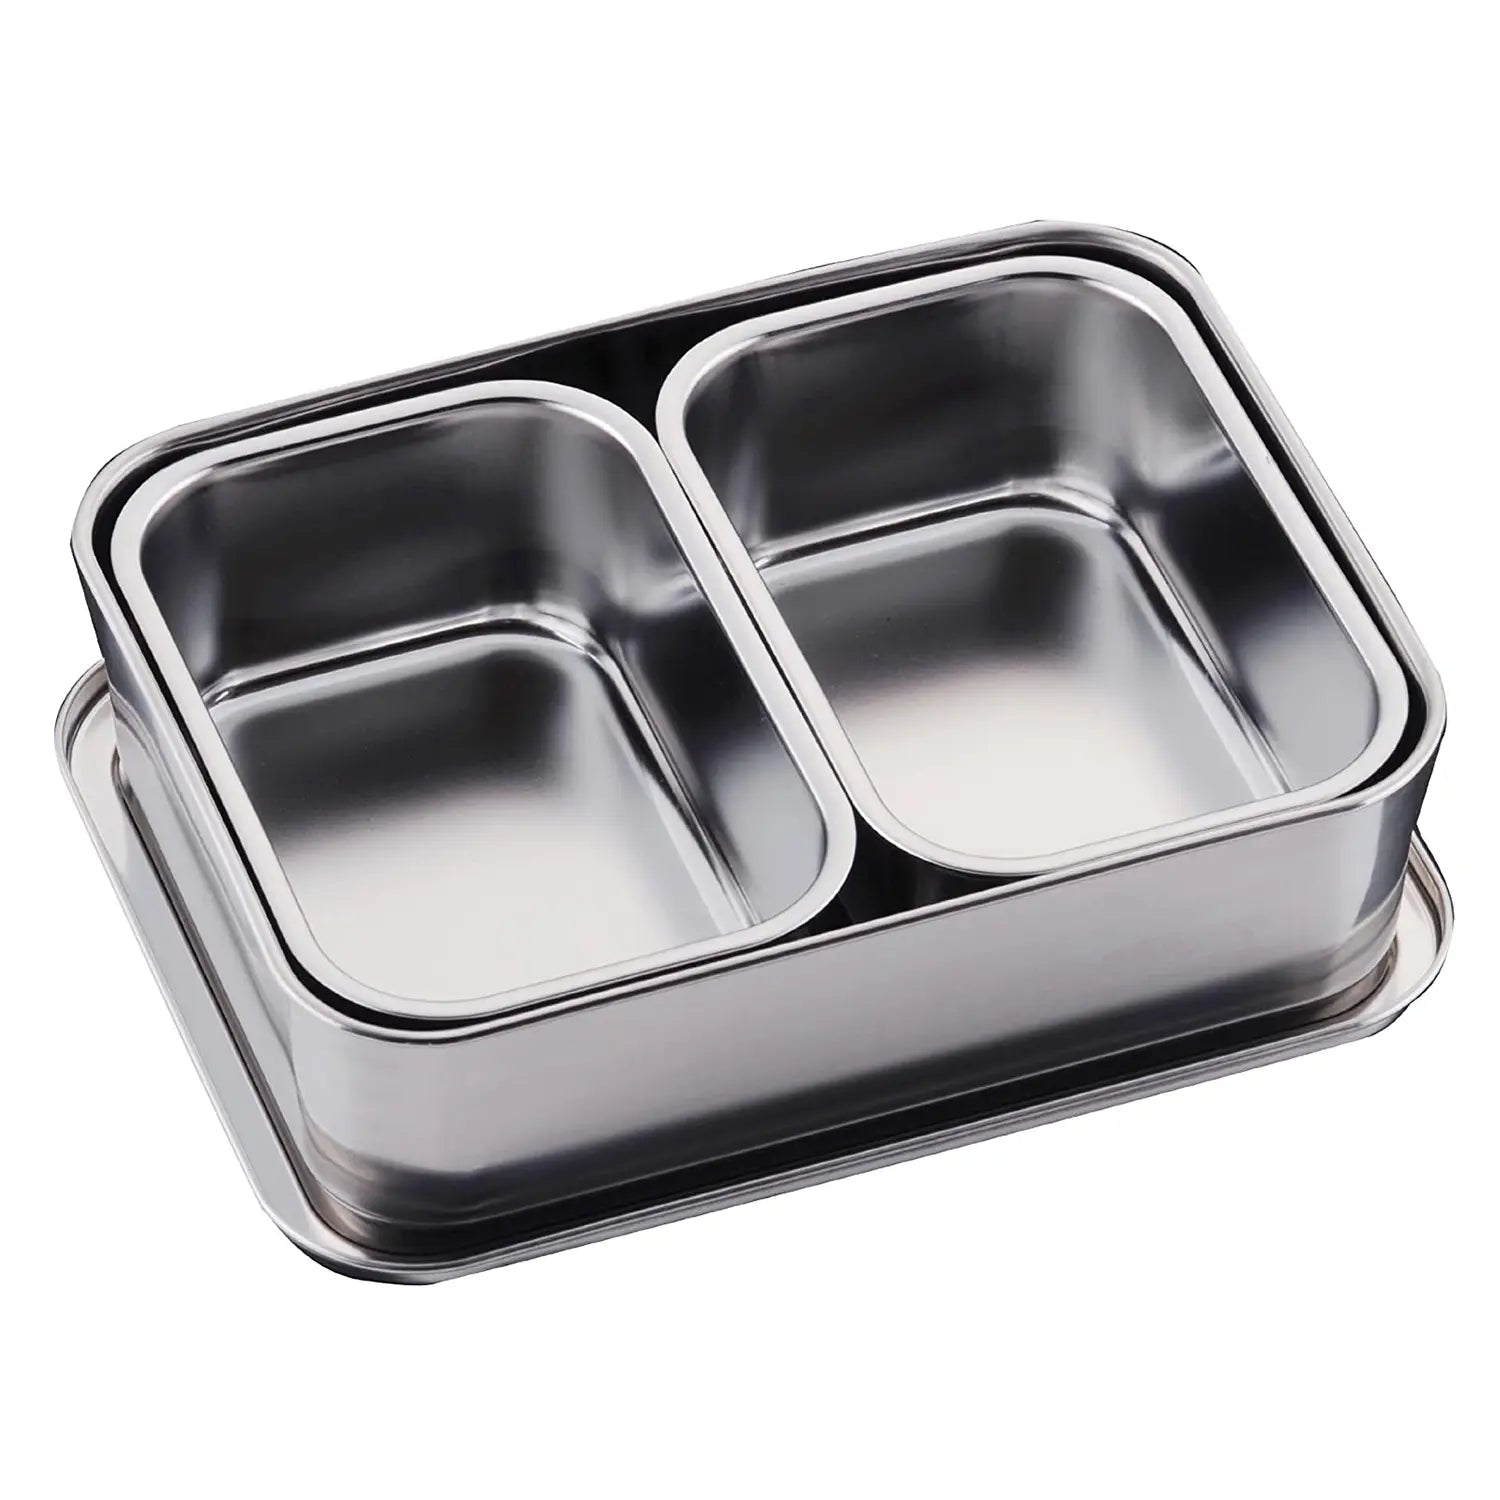 Stainless Yakumi Pan Seasoning Container W/4 Compartments Japan Import NEW